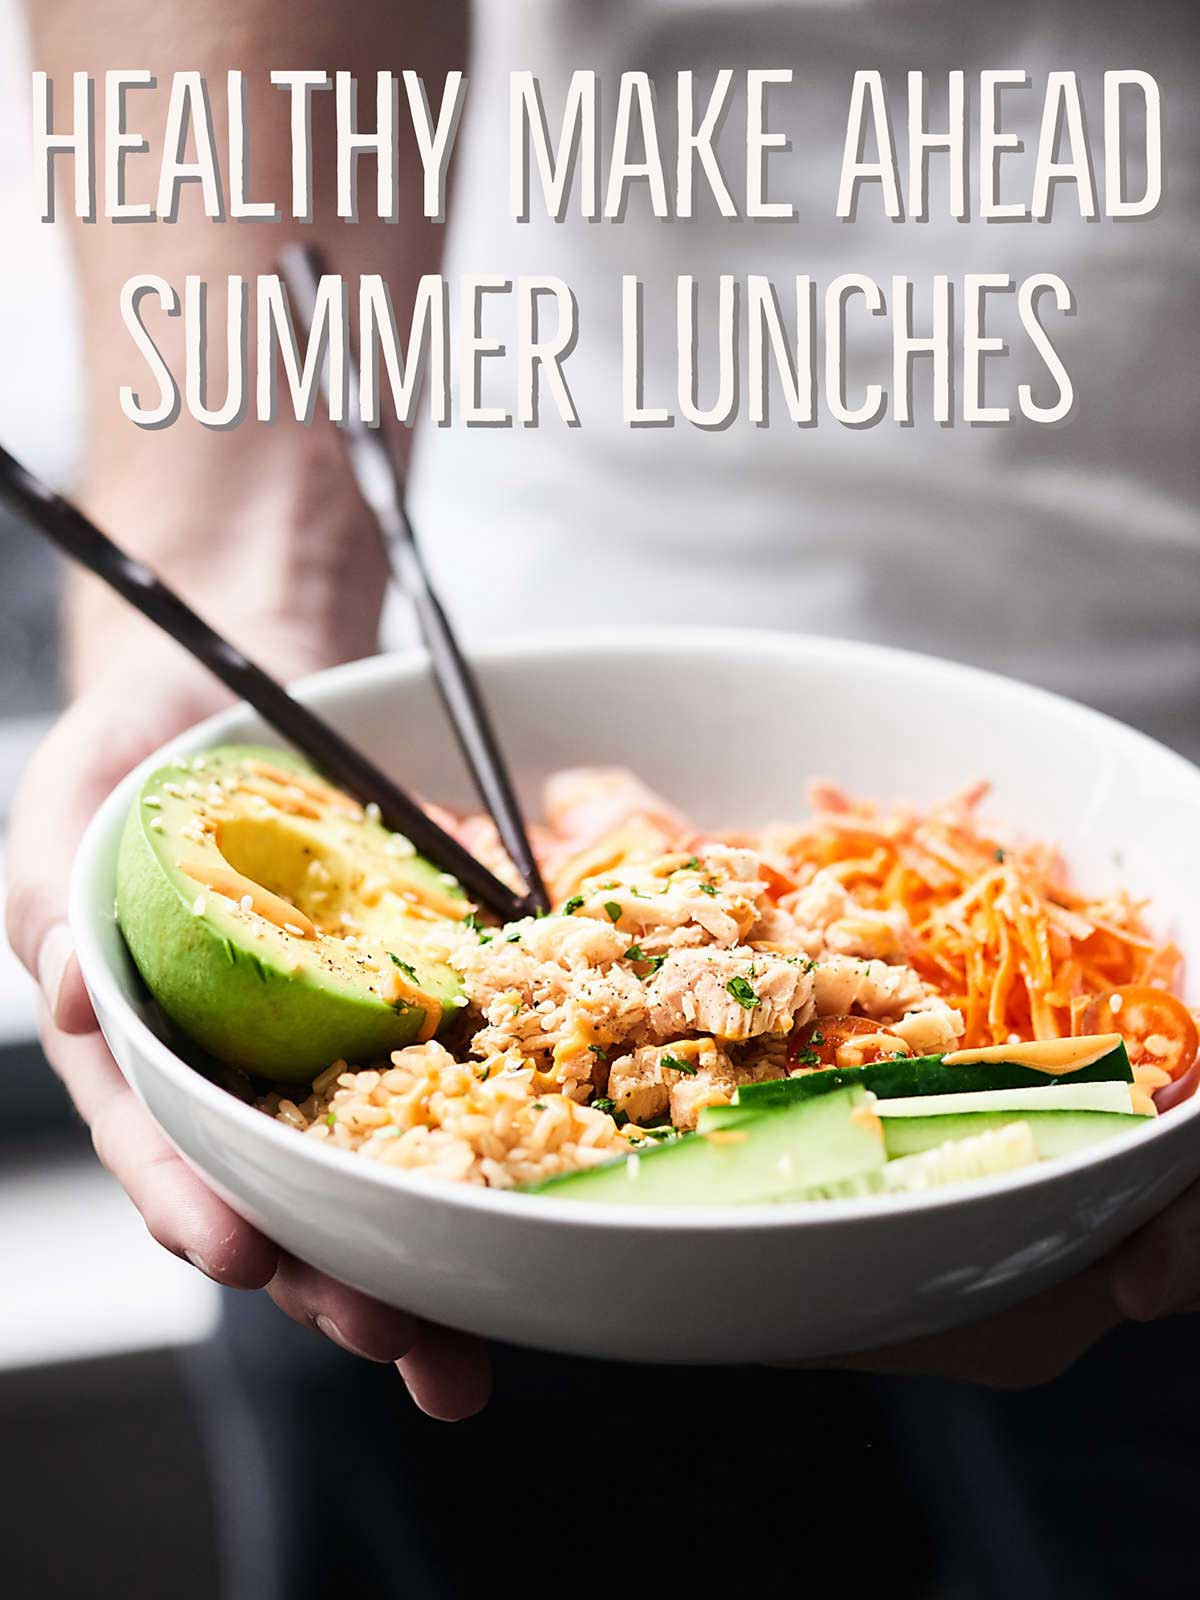 Healthy Summer Lunches
 Easy Healthy Make Ahead Summer Lunches That Aren t All